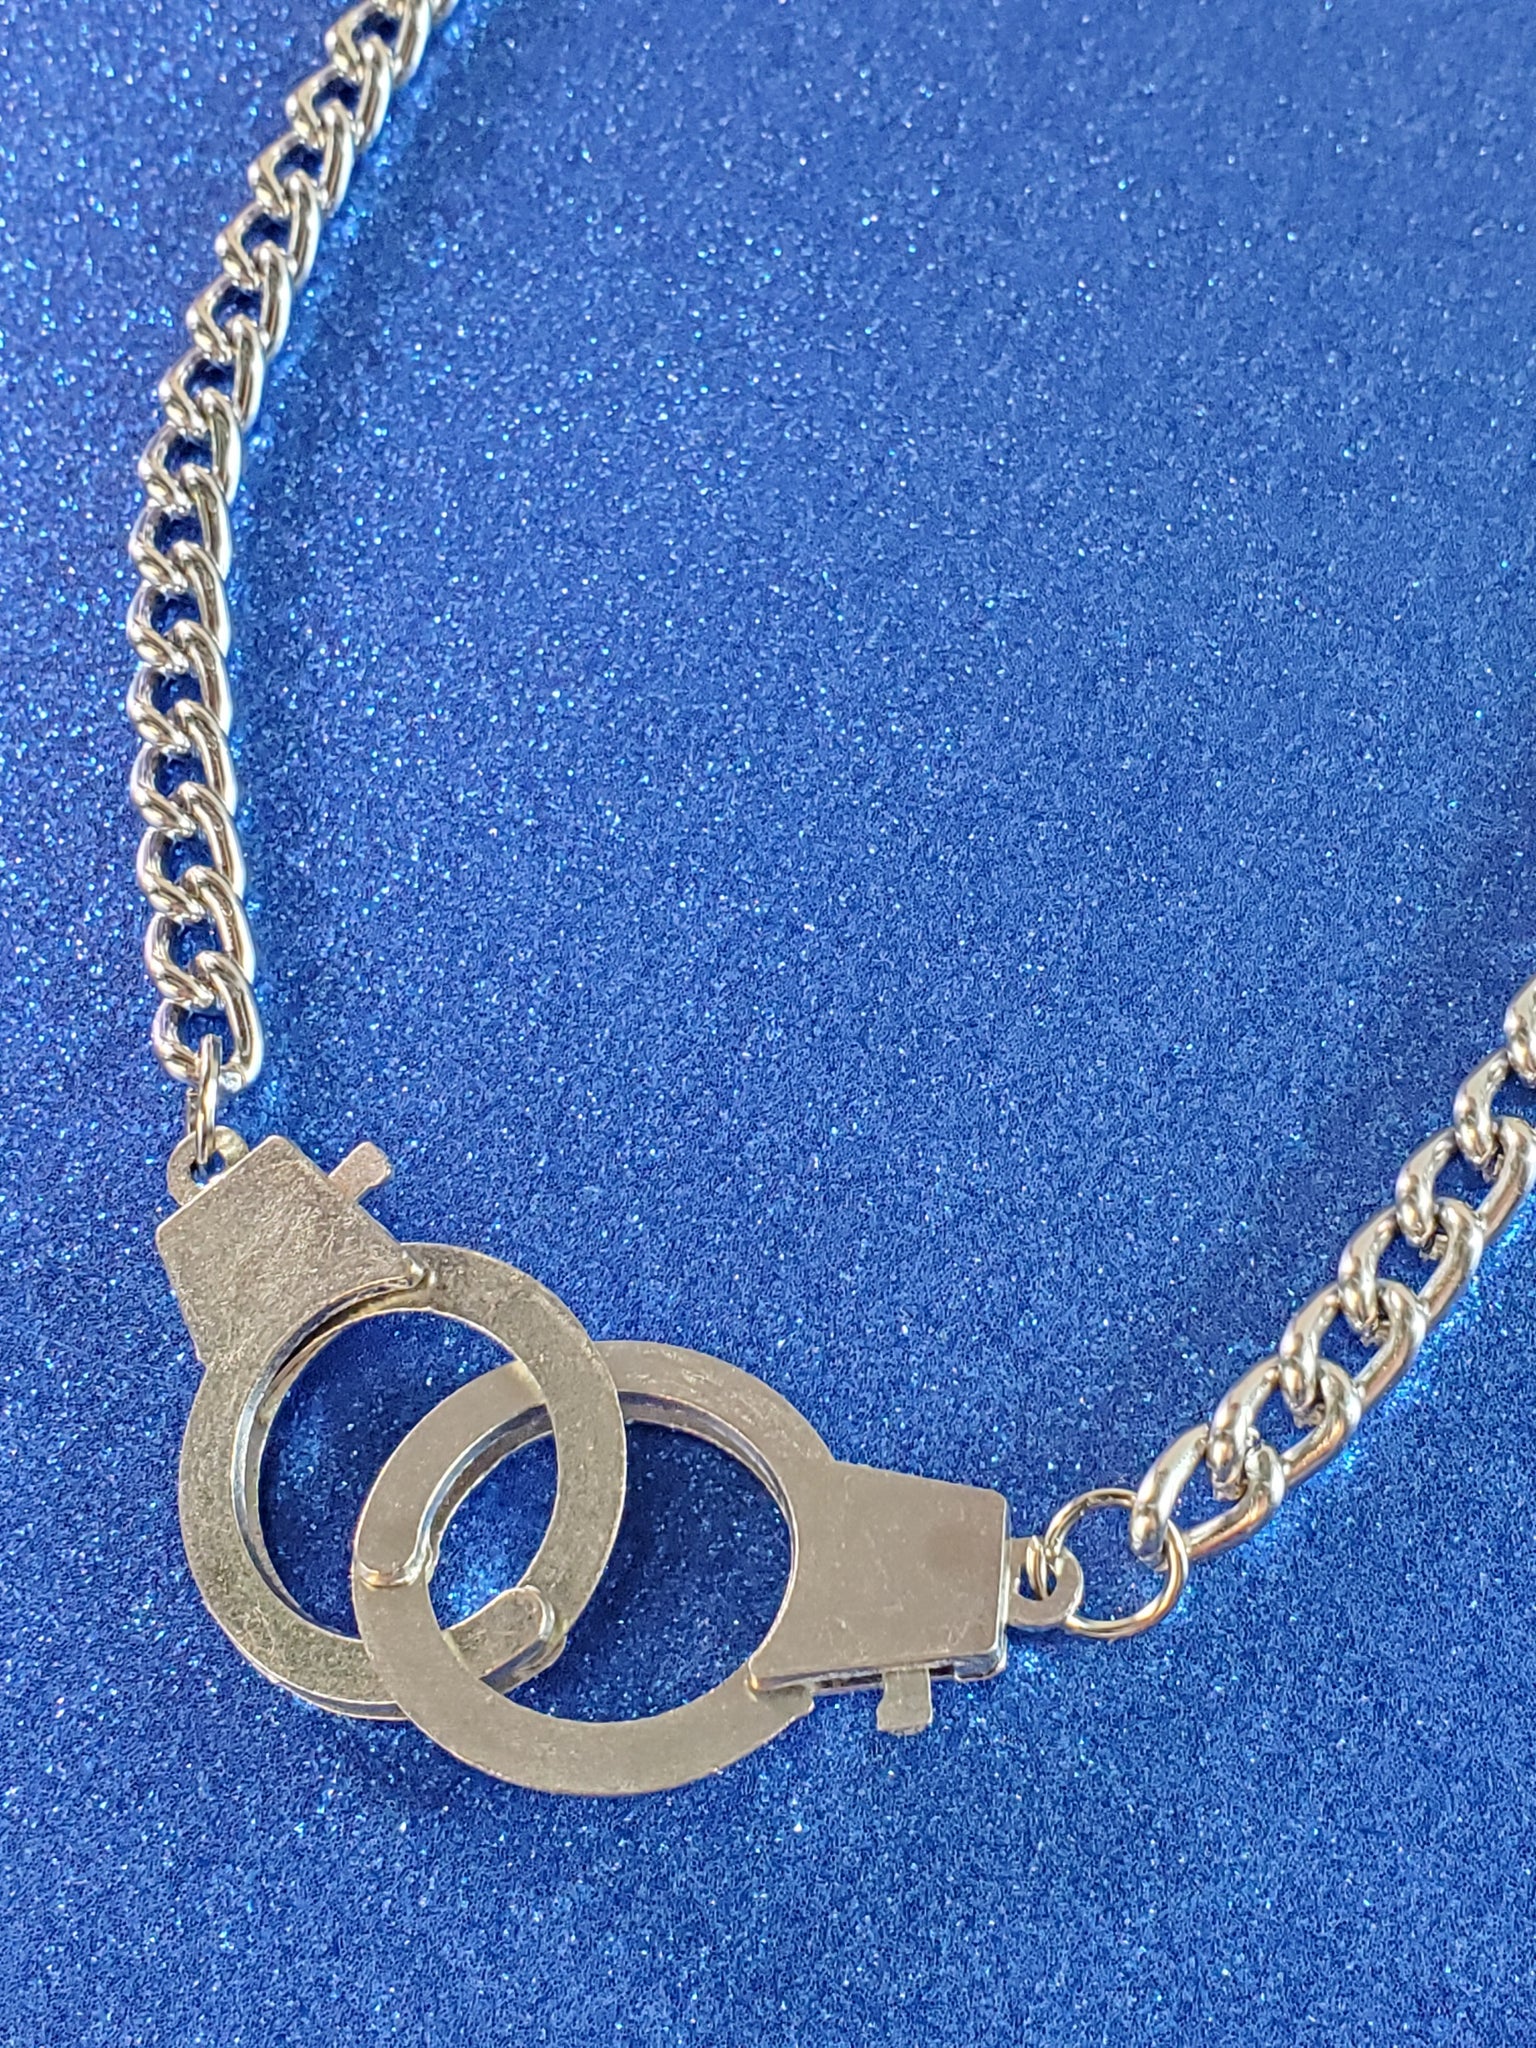 Silver Handcuff Necklace by Switchblade Stiletto